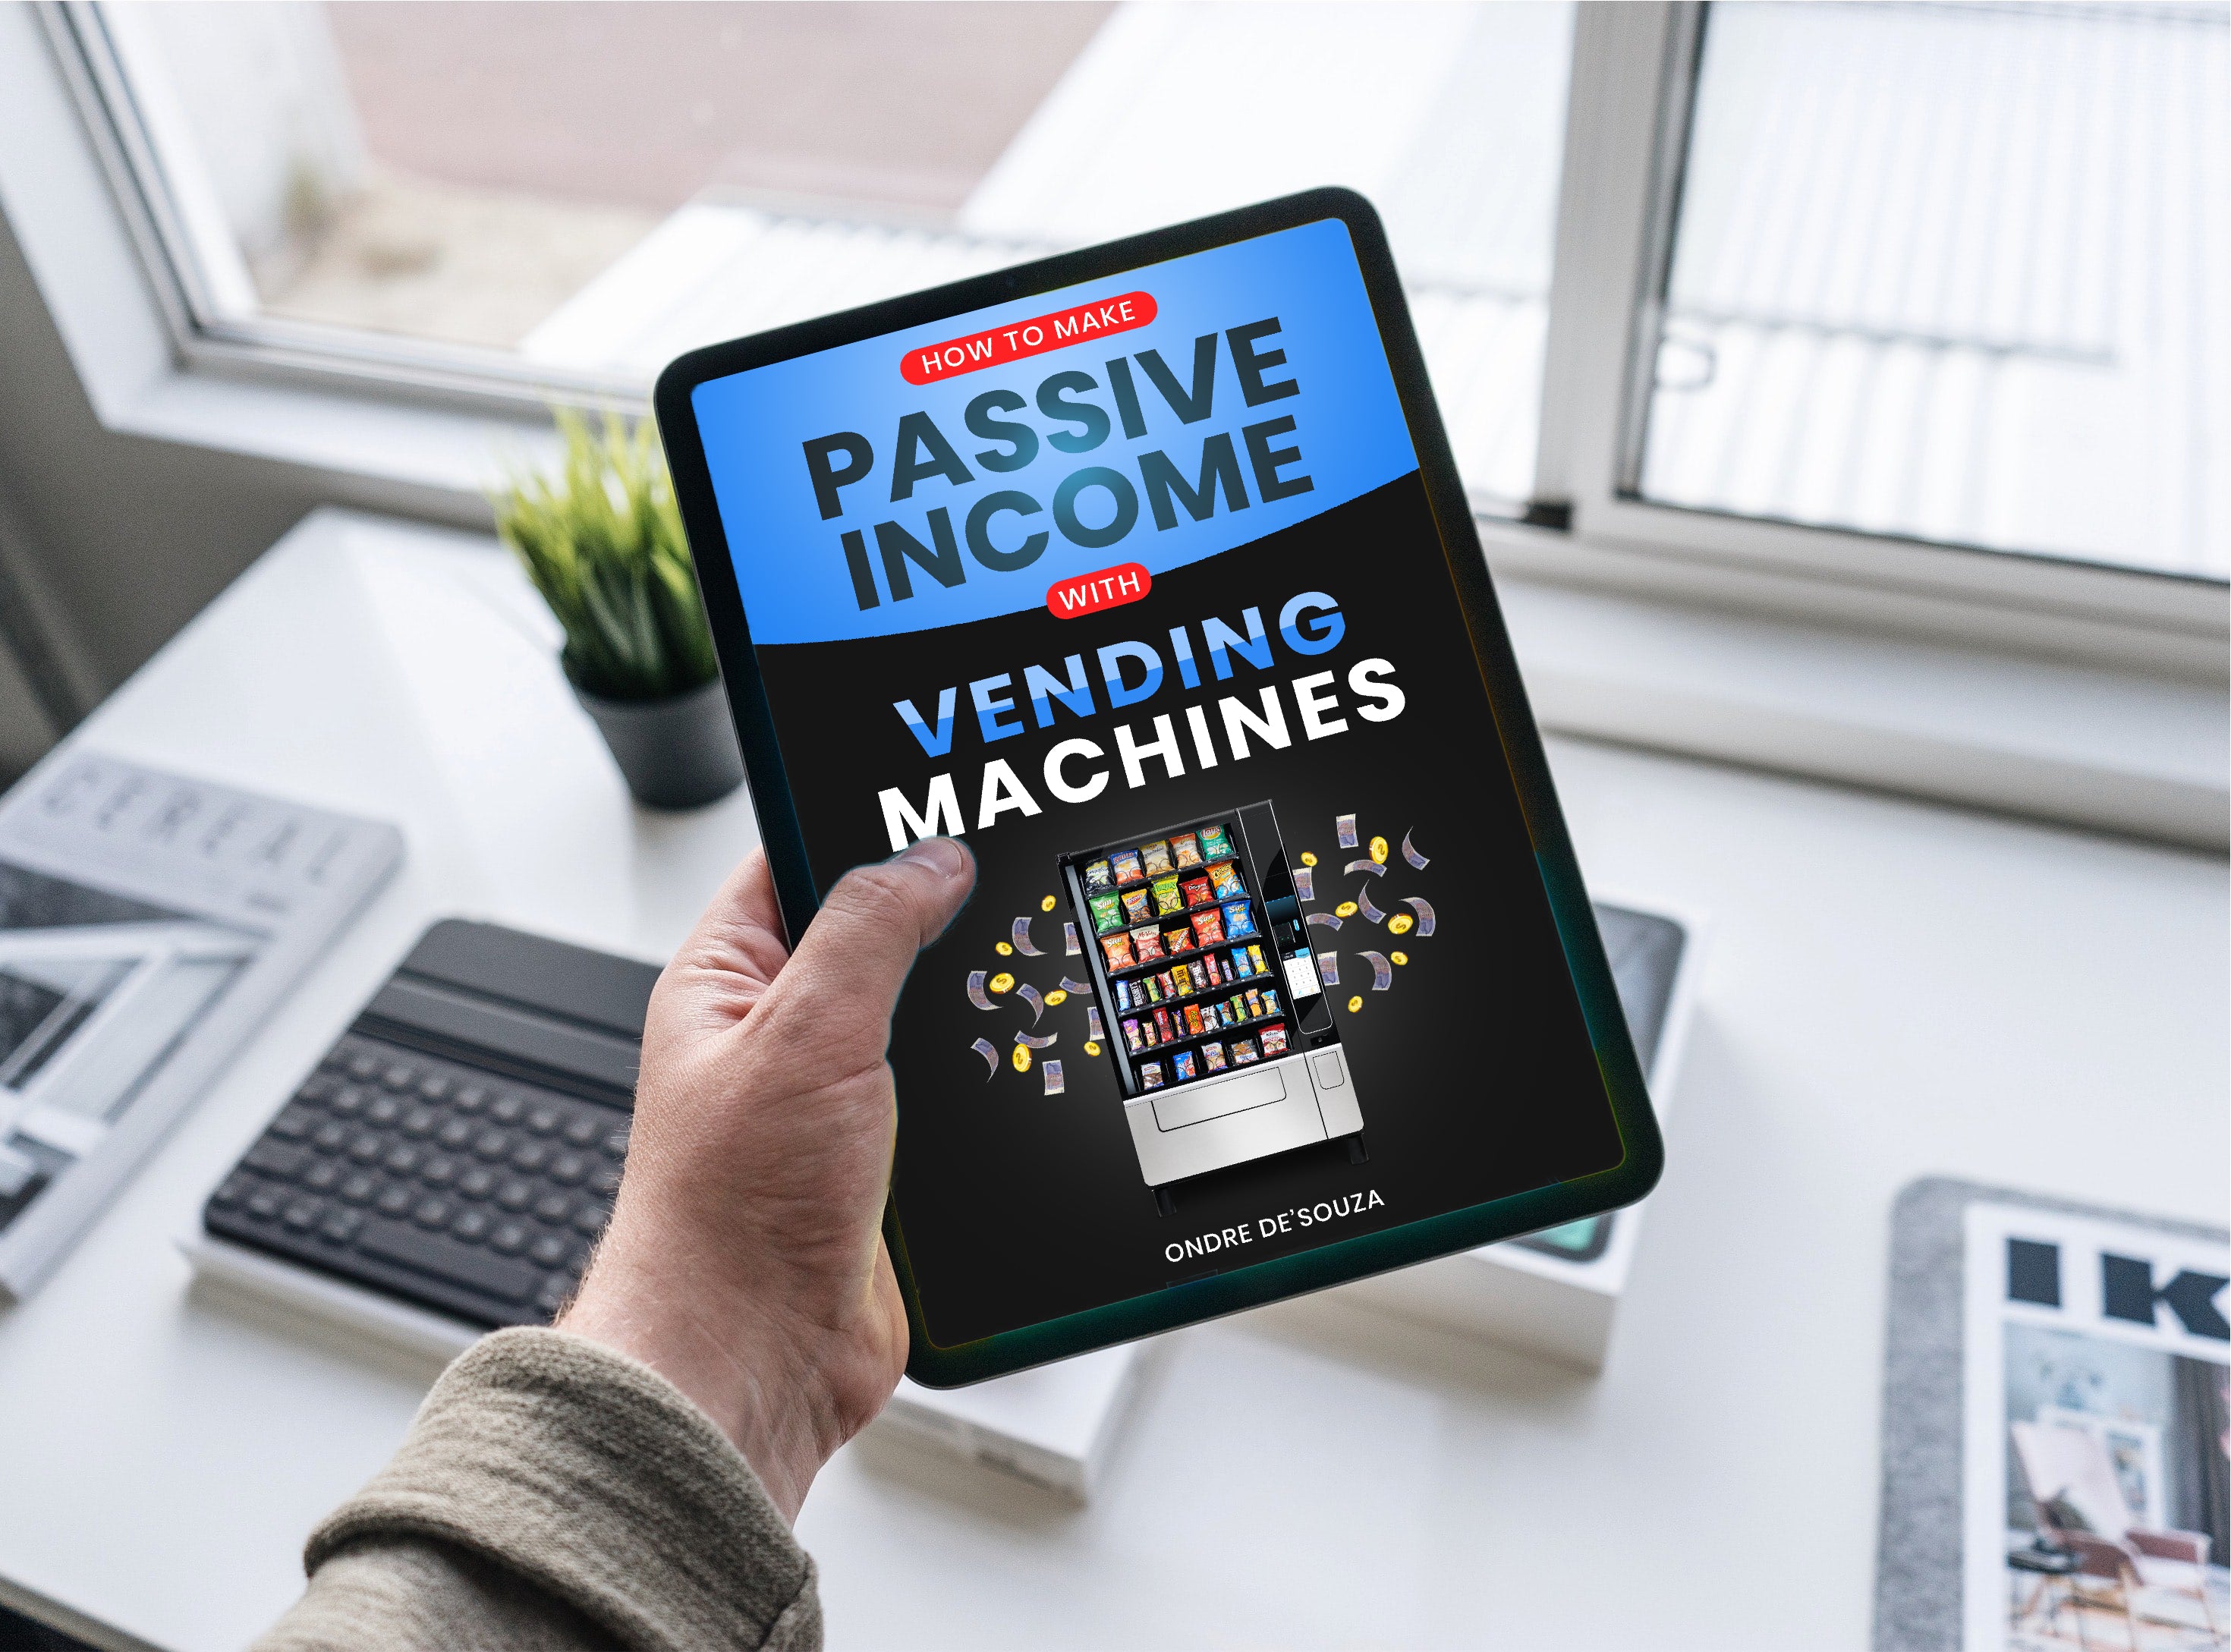 How To Make Passive Income With Vending Machines - Blueprint Vending